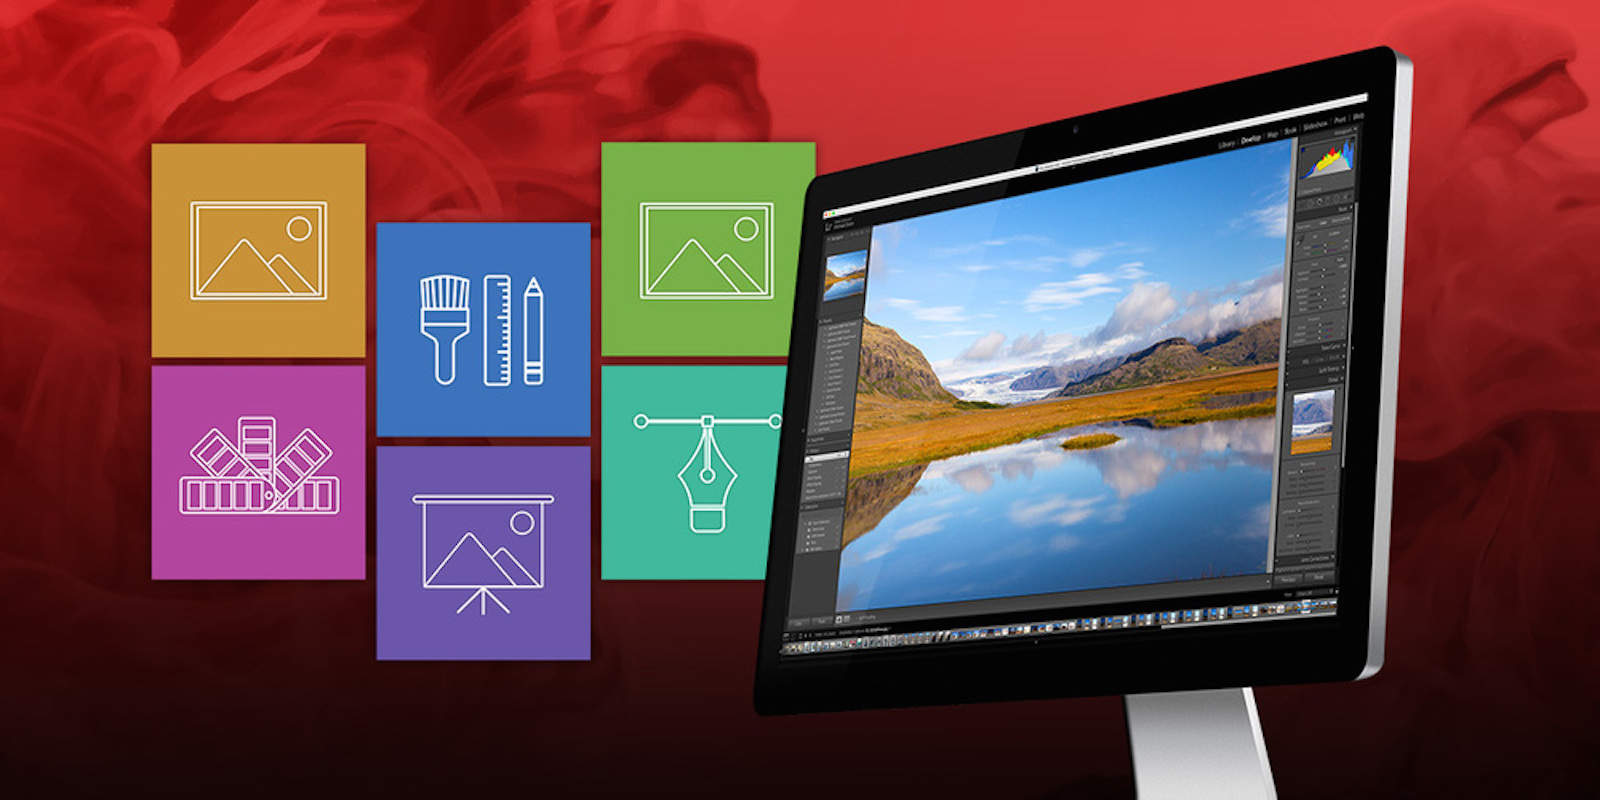 Get a year of access to Adobe's photo products, and comprehensive lessons in using them.